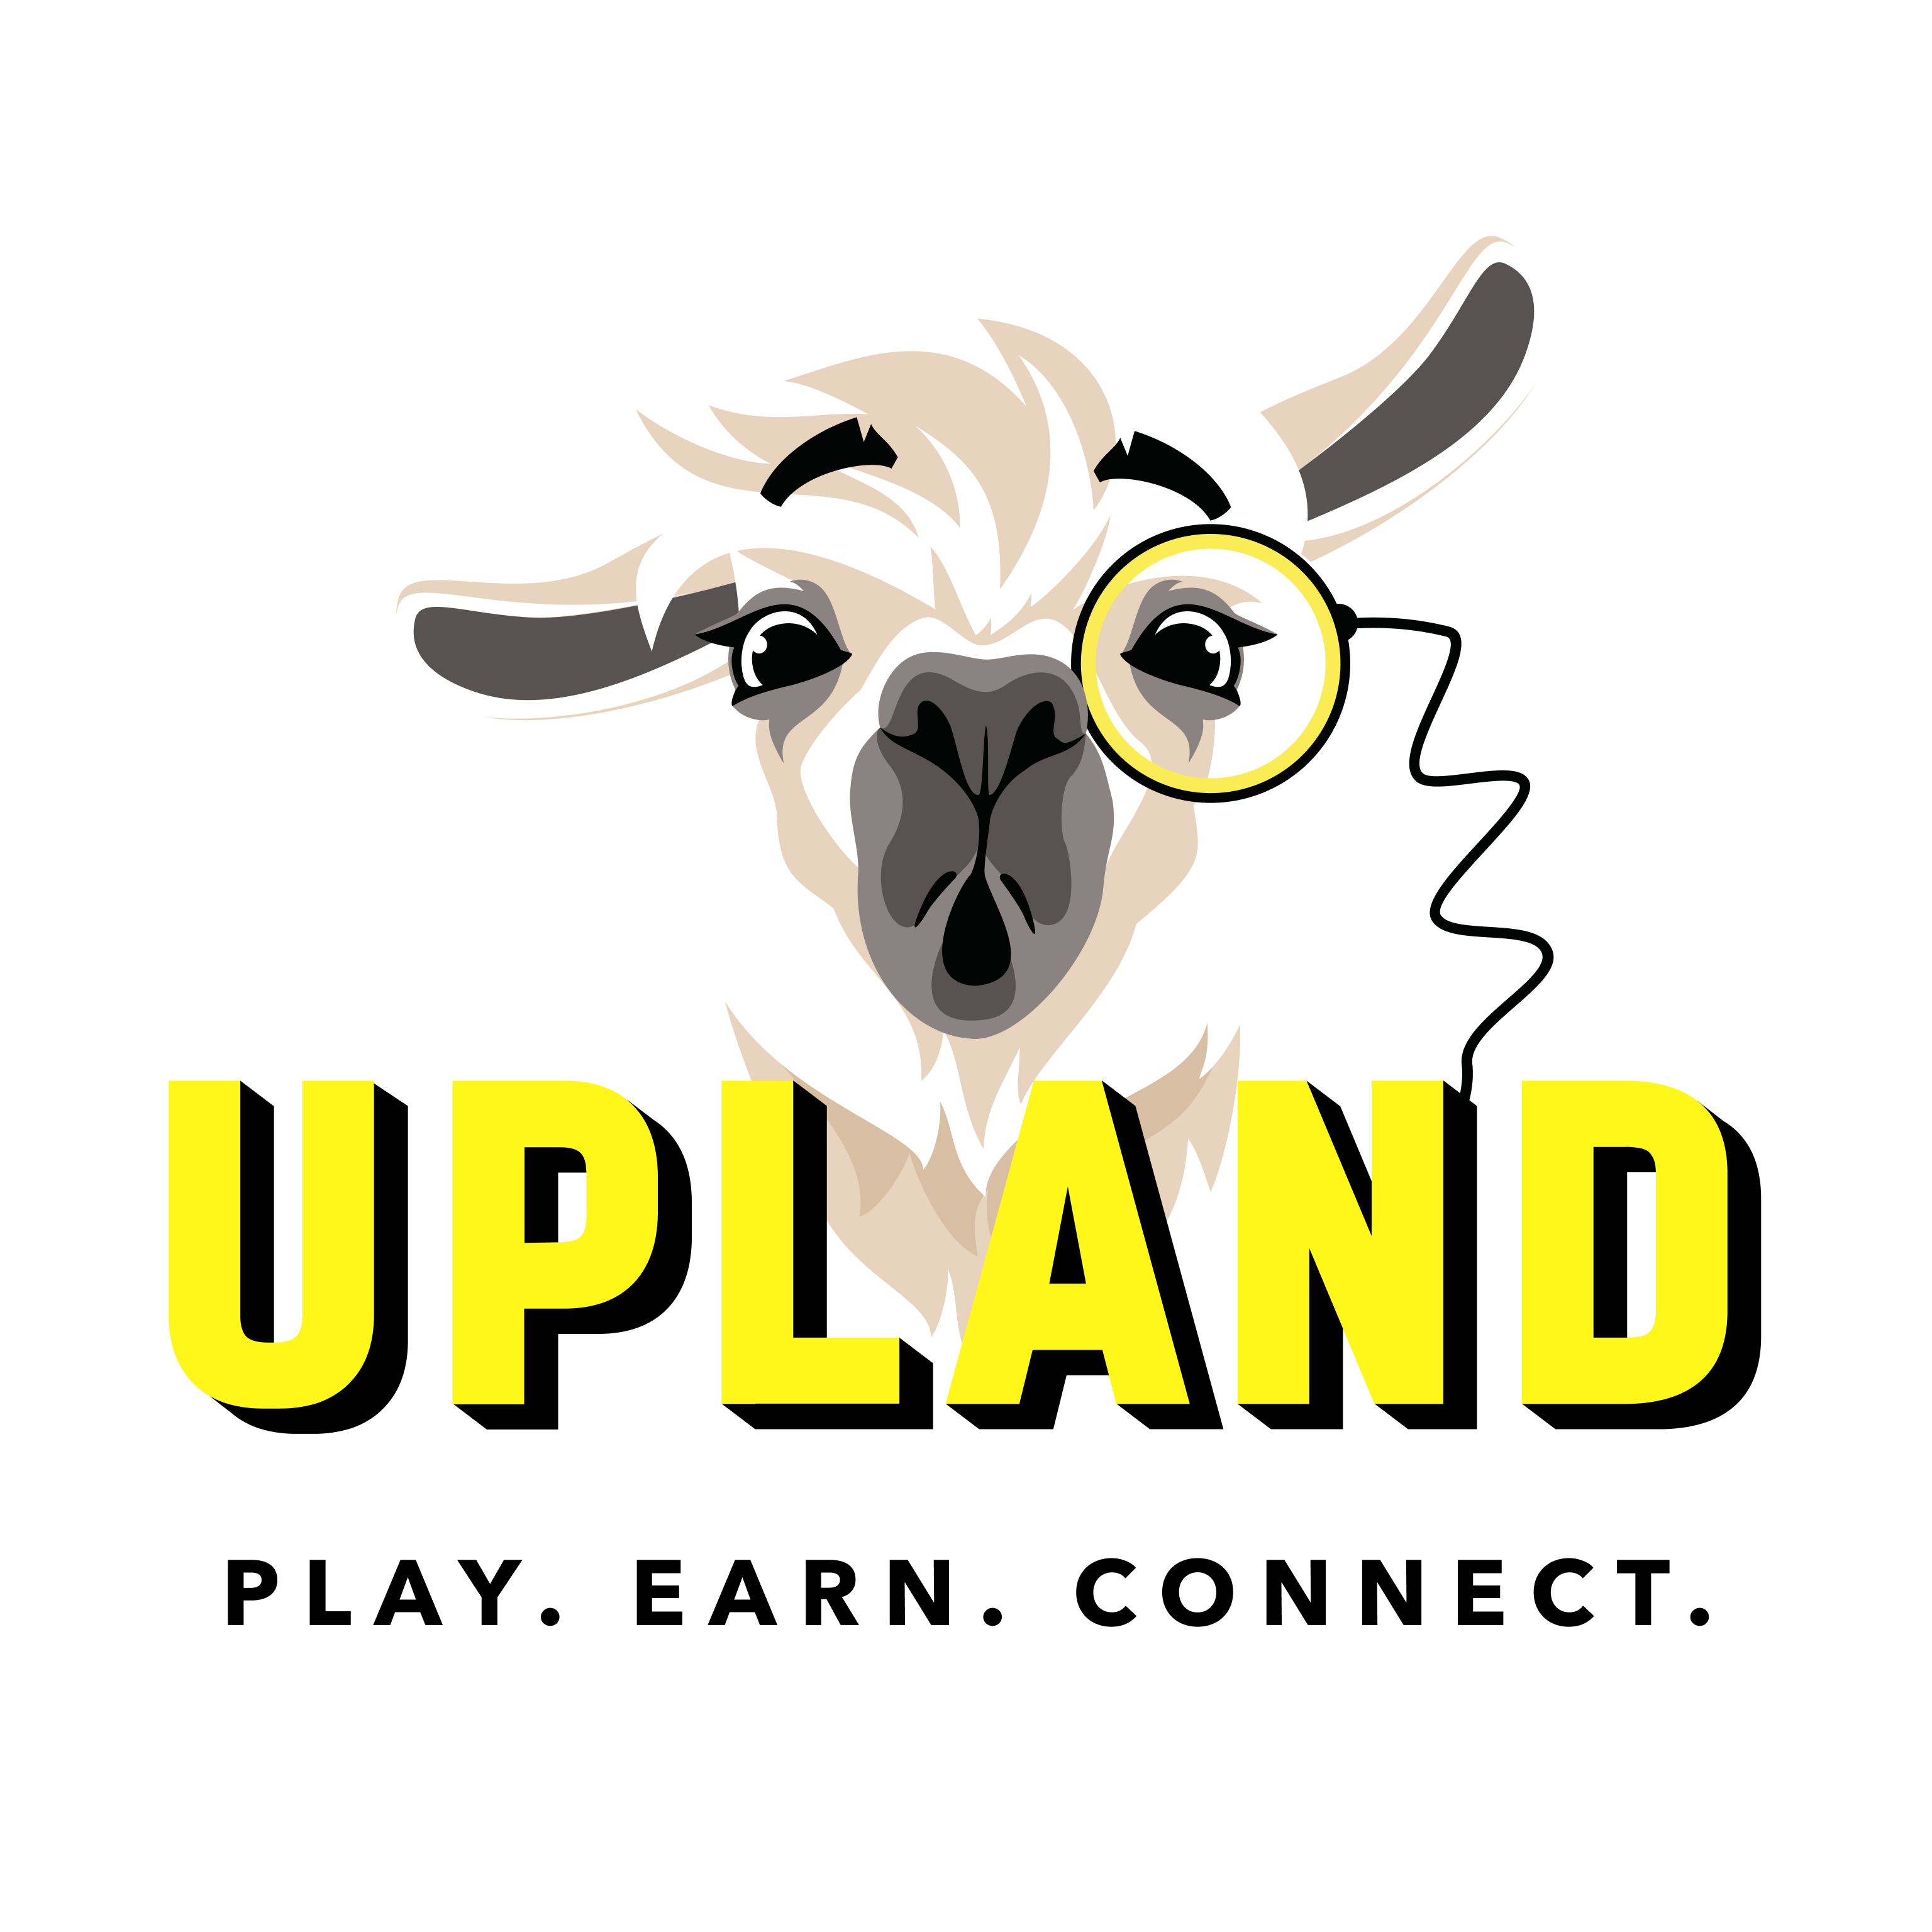 Upland Launches with Cleveland and Chicago, Two New Cities in the US to Serve its Fast-Growing User Base